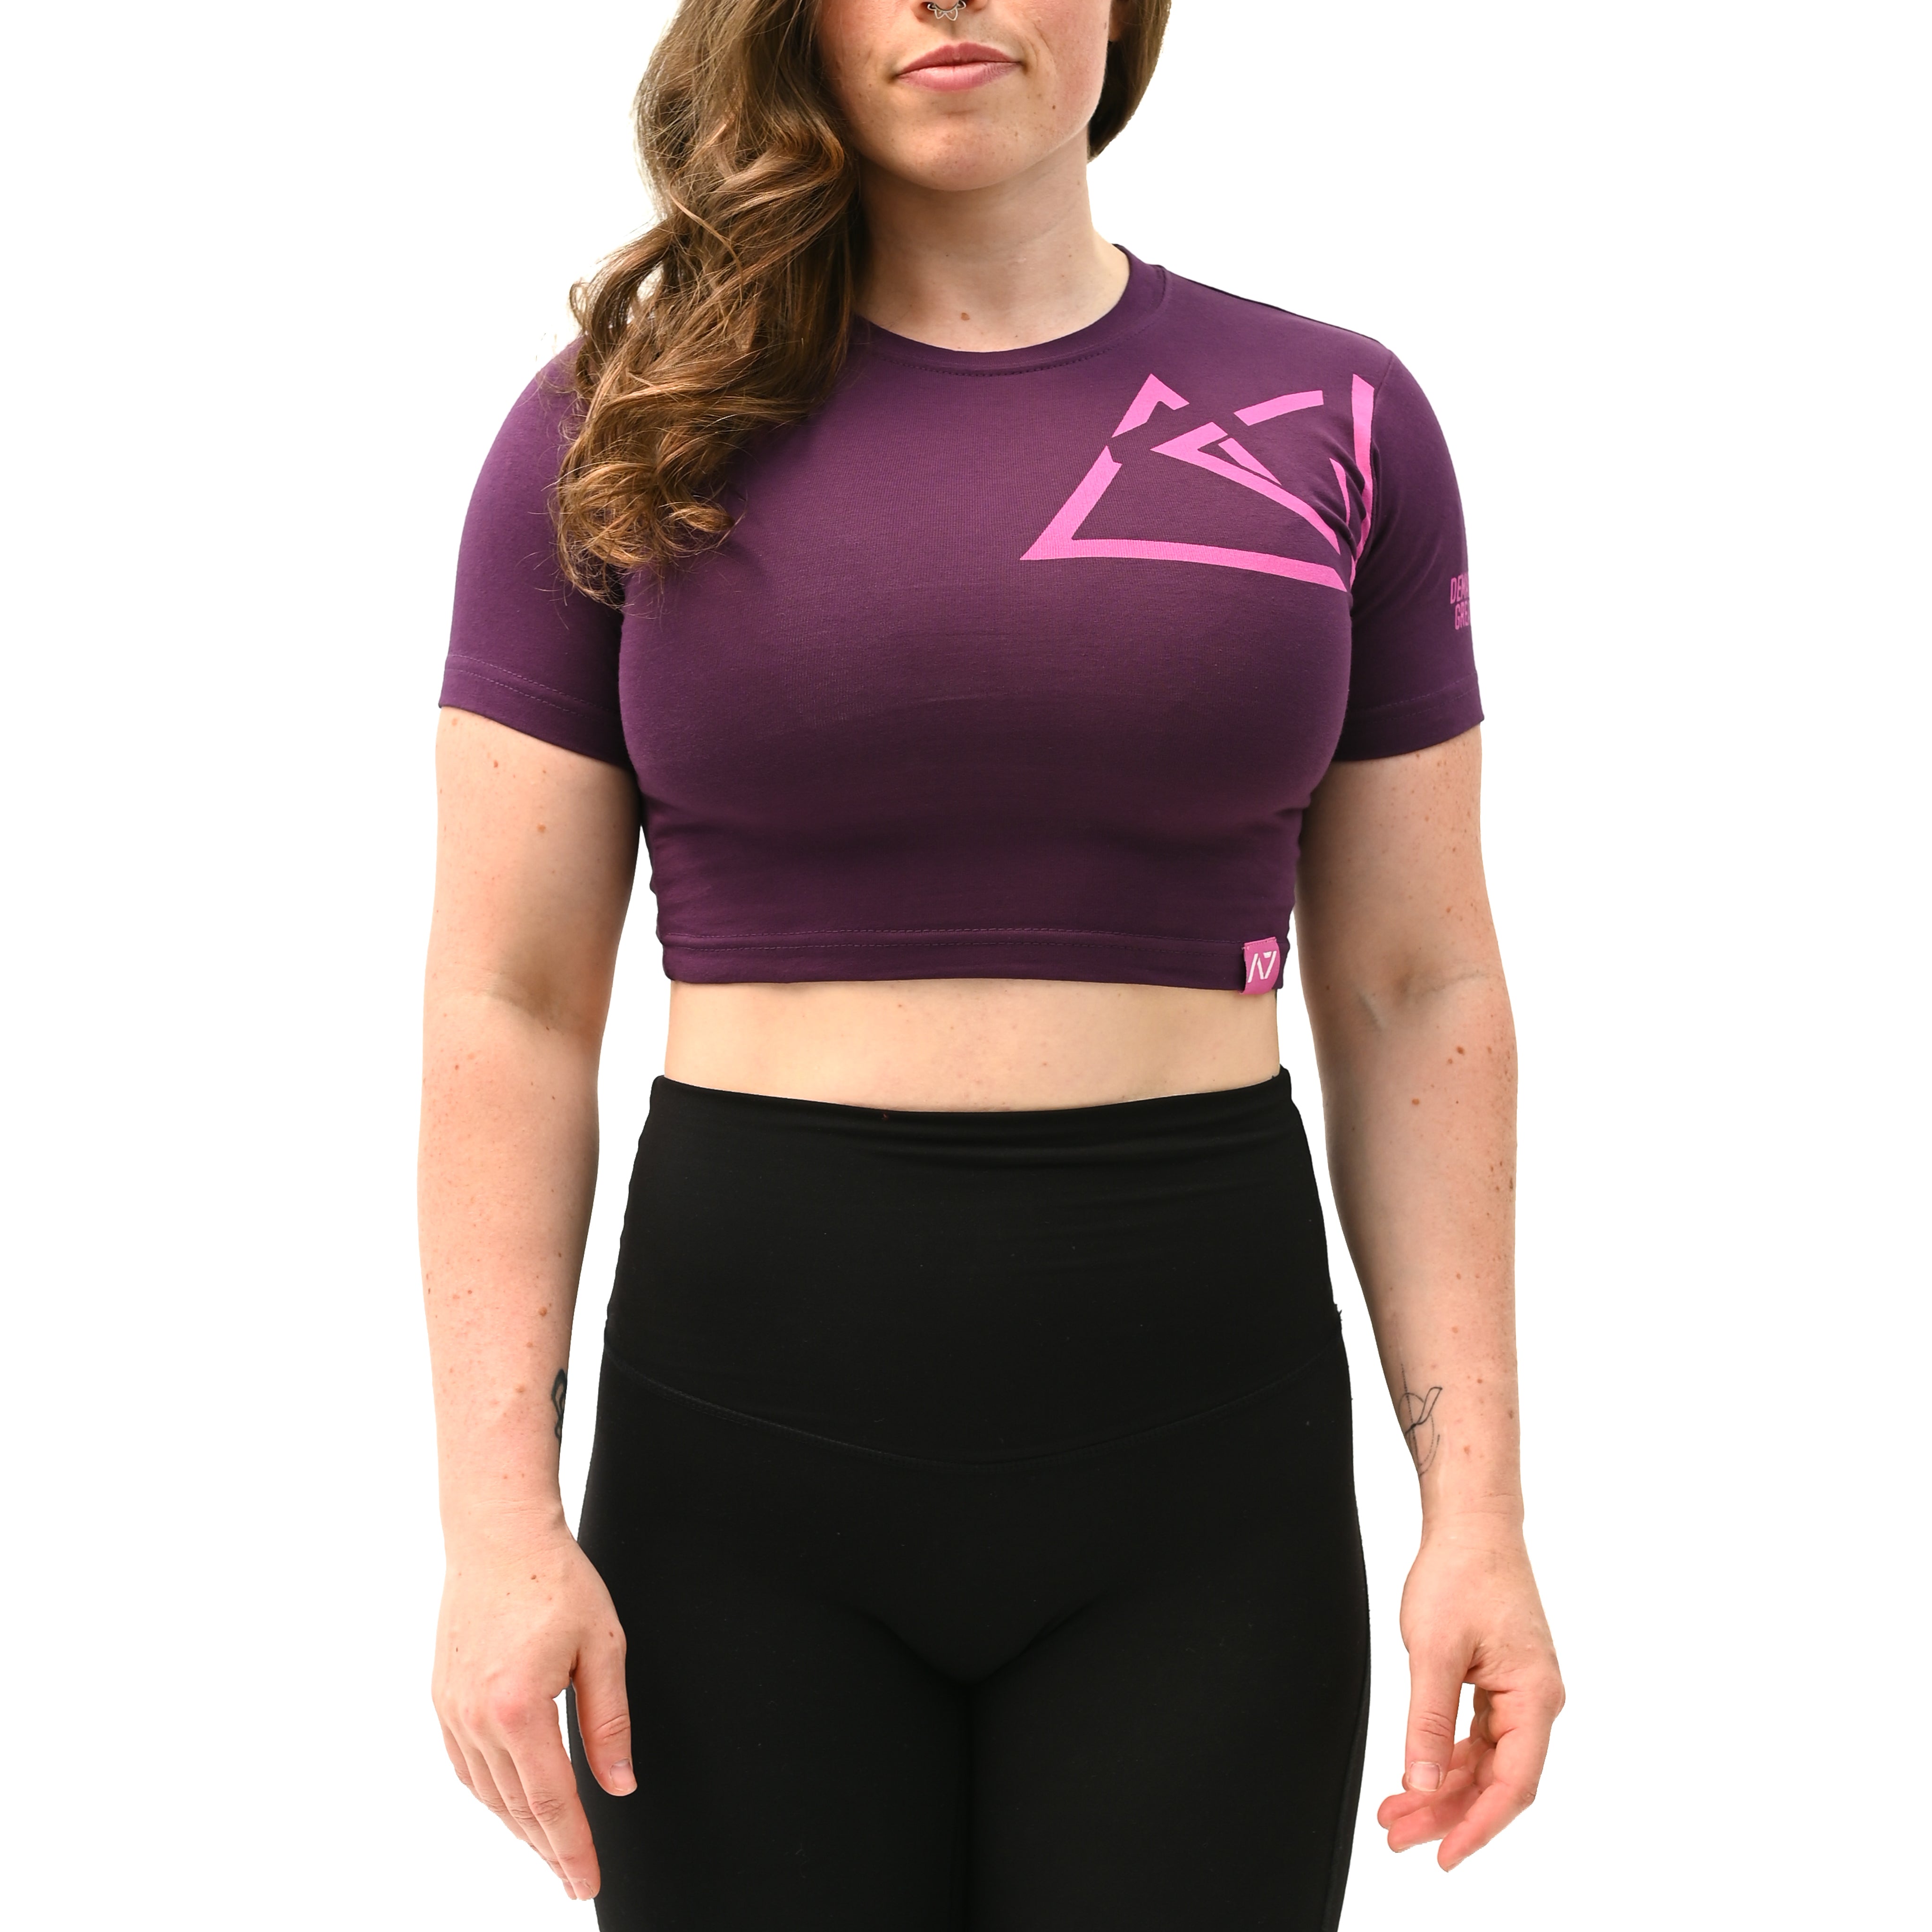 Delta Link Crop Non Bar Grip T-Shirt is perfect for in and out of the gym. Purchase Delta Link Crop Non Bar Grip tshirt UK from A7 UK. Purchase Delta Link Crop Shirt Europe from A7 UK. Best gymwear shipping to UK and Europe from A7 UK. Delta Link Crop is our newest Non Bar Grip Design. The best Powerlifting apparel for all your workouts. Available in UK and Europe including France, Italy, Germany, Sweden and Poland.